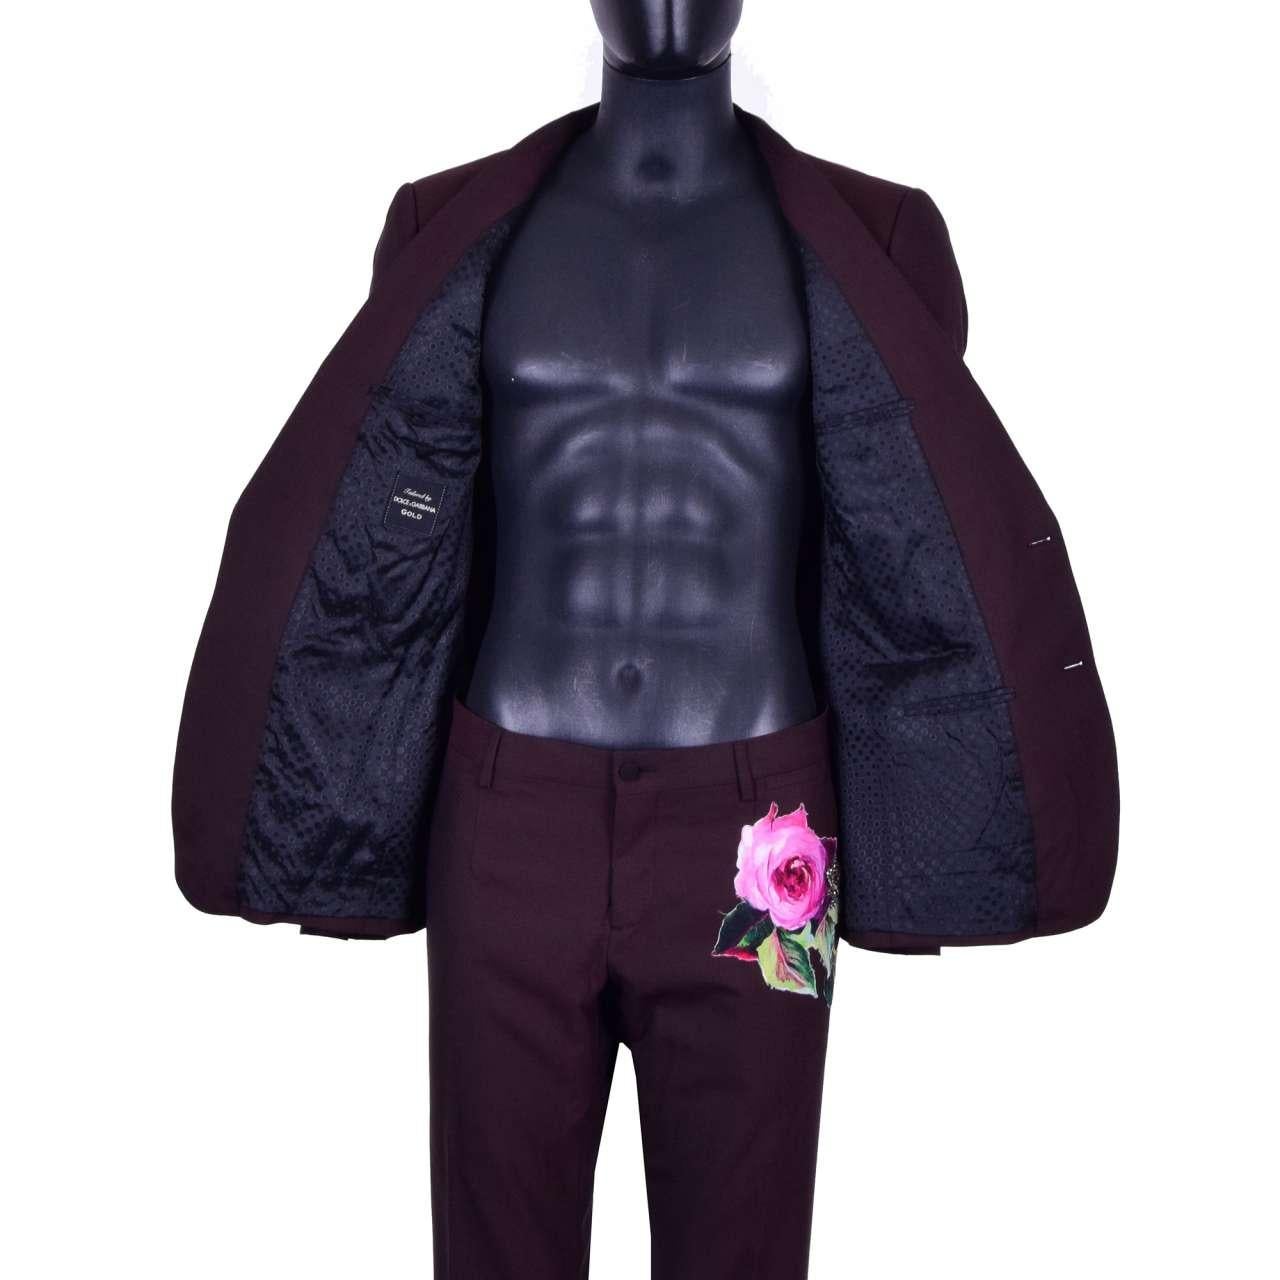 - Virgin Wool suit with handmade floral applications and crystals bees brooches by DOLCE & GABBANA Black Line - RUNWAY - Dolce & Gabbana Fashion Show - GOLD Line - New with tag - Former RRP: EUR 3.250 - MADE in ITALY - Slim Fit - Model: